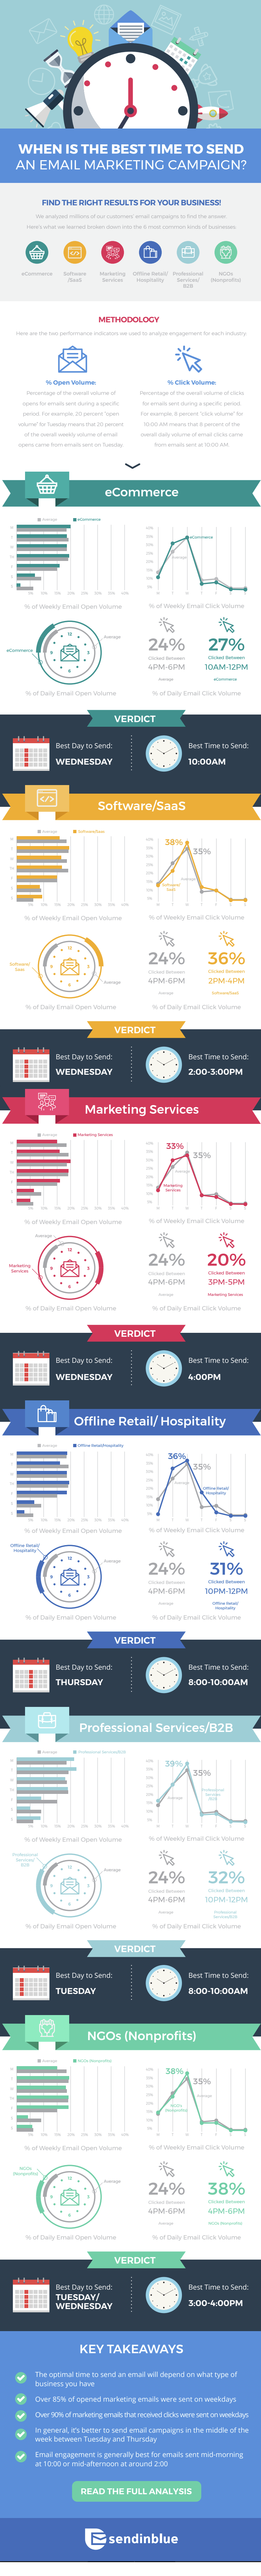 When is the Best Time to Send an Email Marketing Campaign - #Infographic